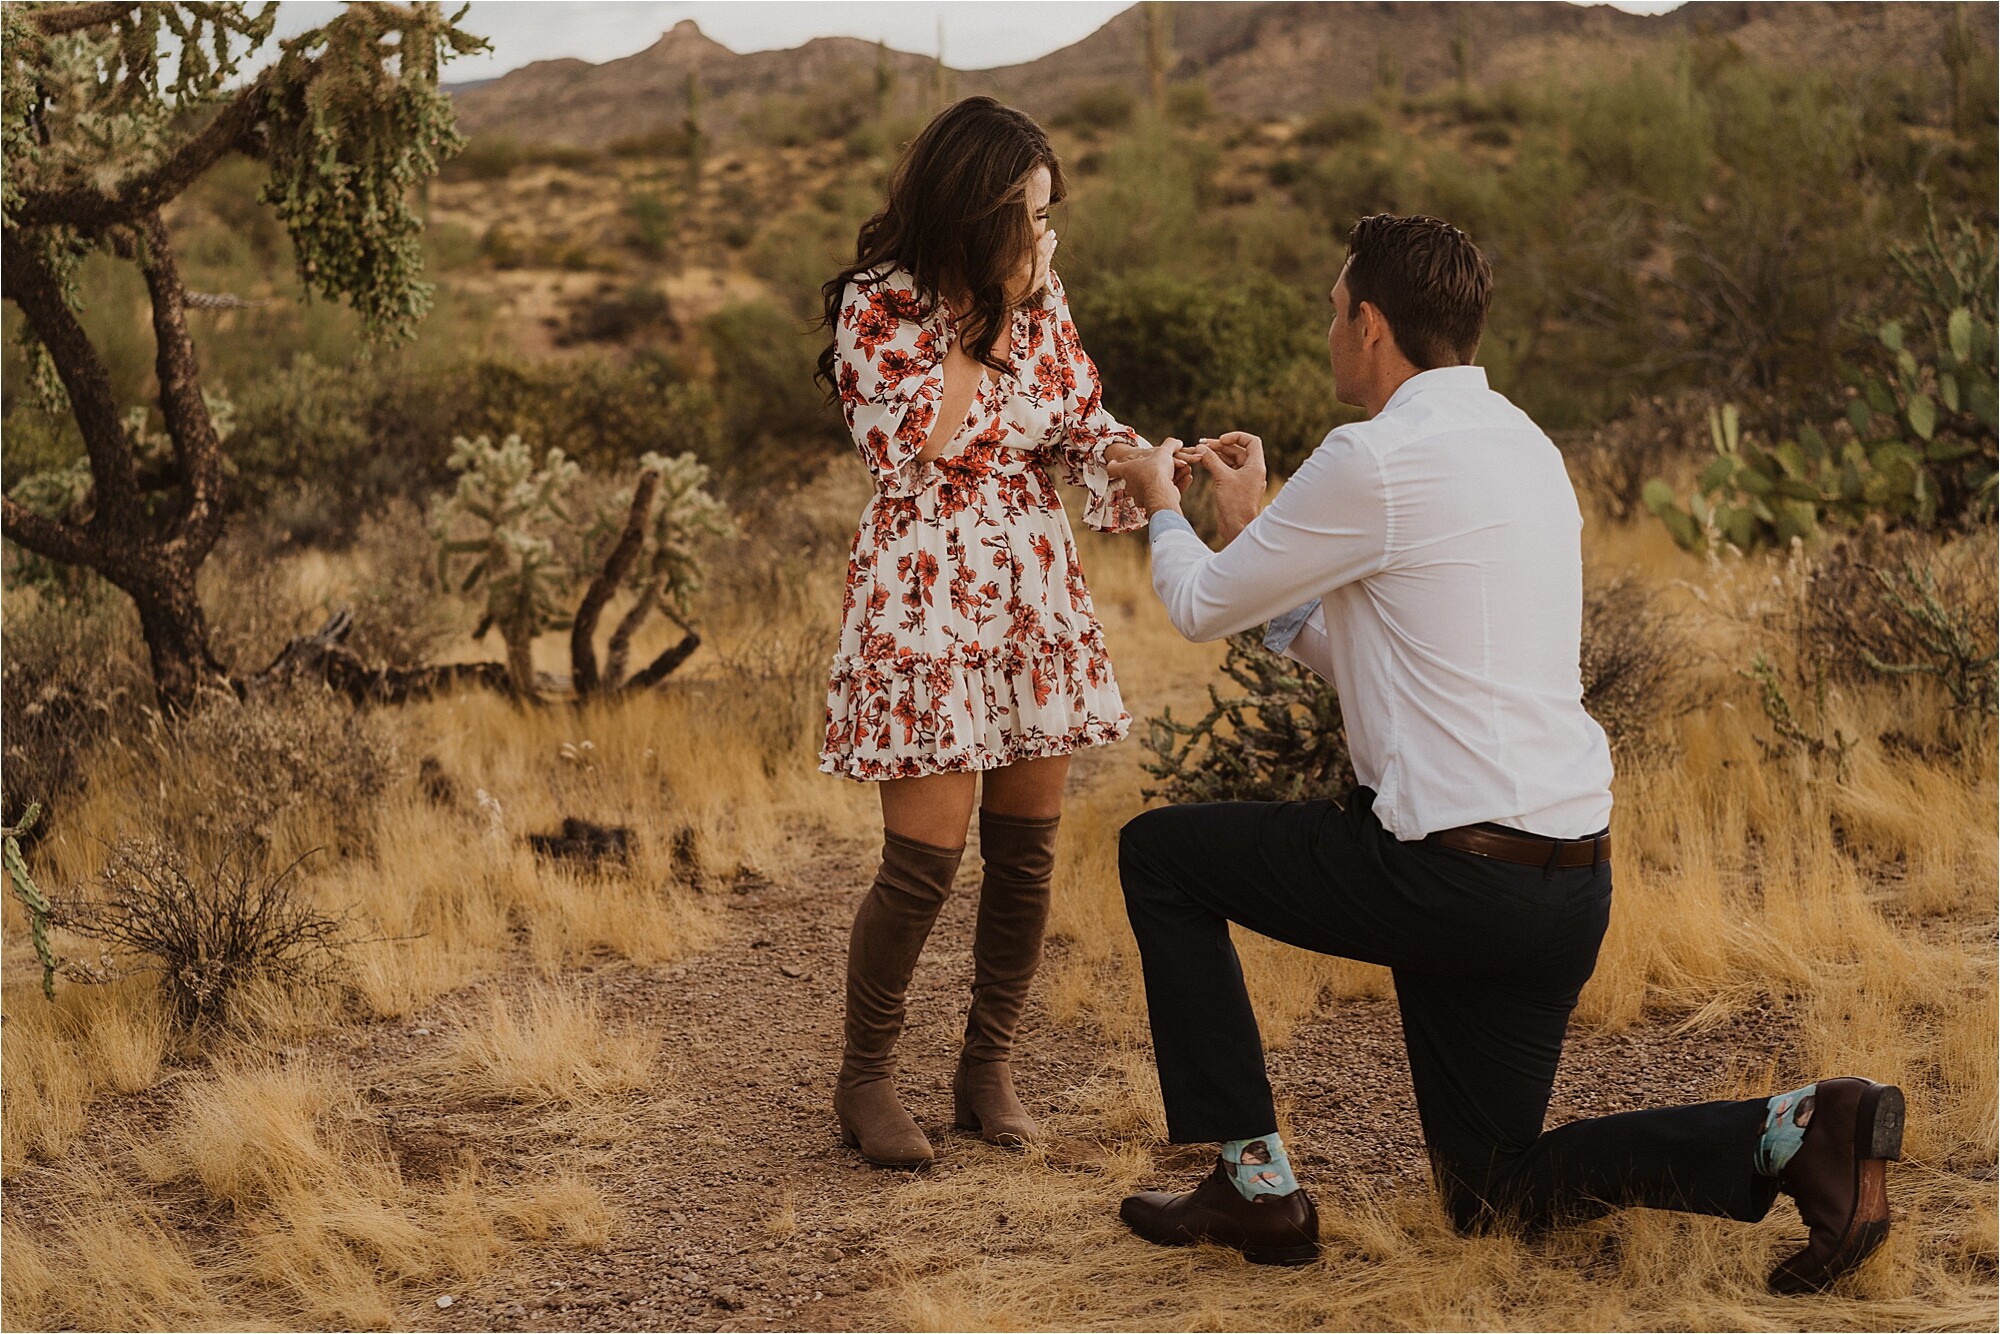 Personalize Your Marriage Proposal